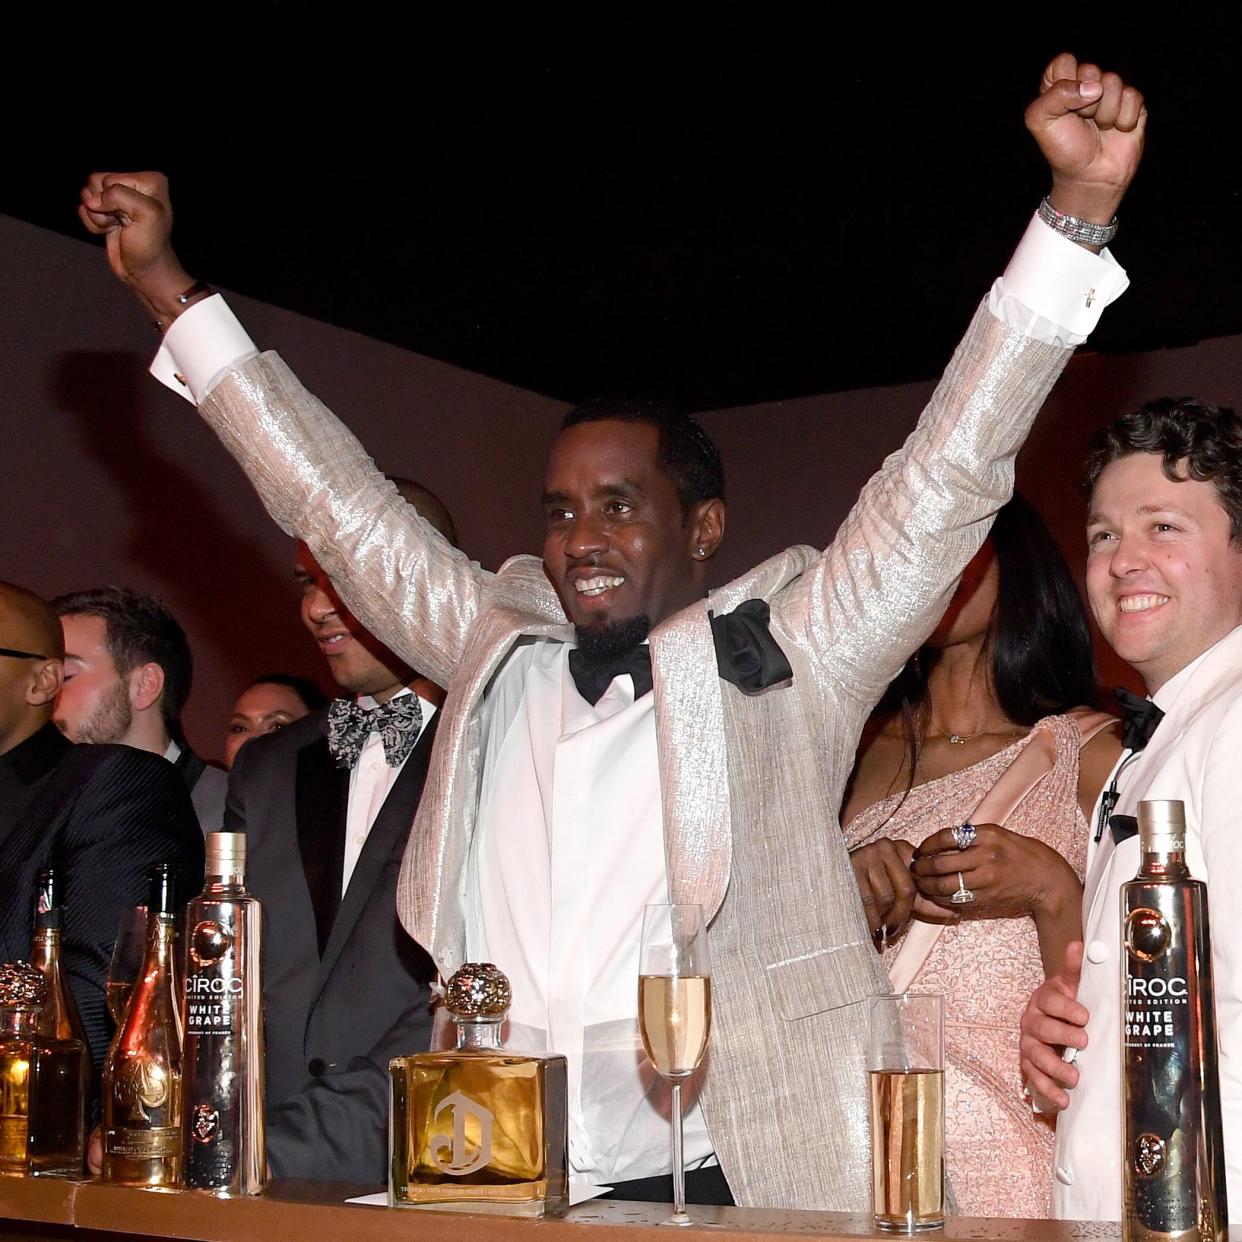 Sean "Diddy" Combs celebrates at his 50th birthday party on Dec. 14, 2019, with Ciroc.